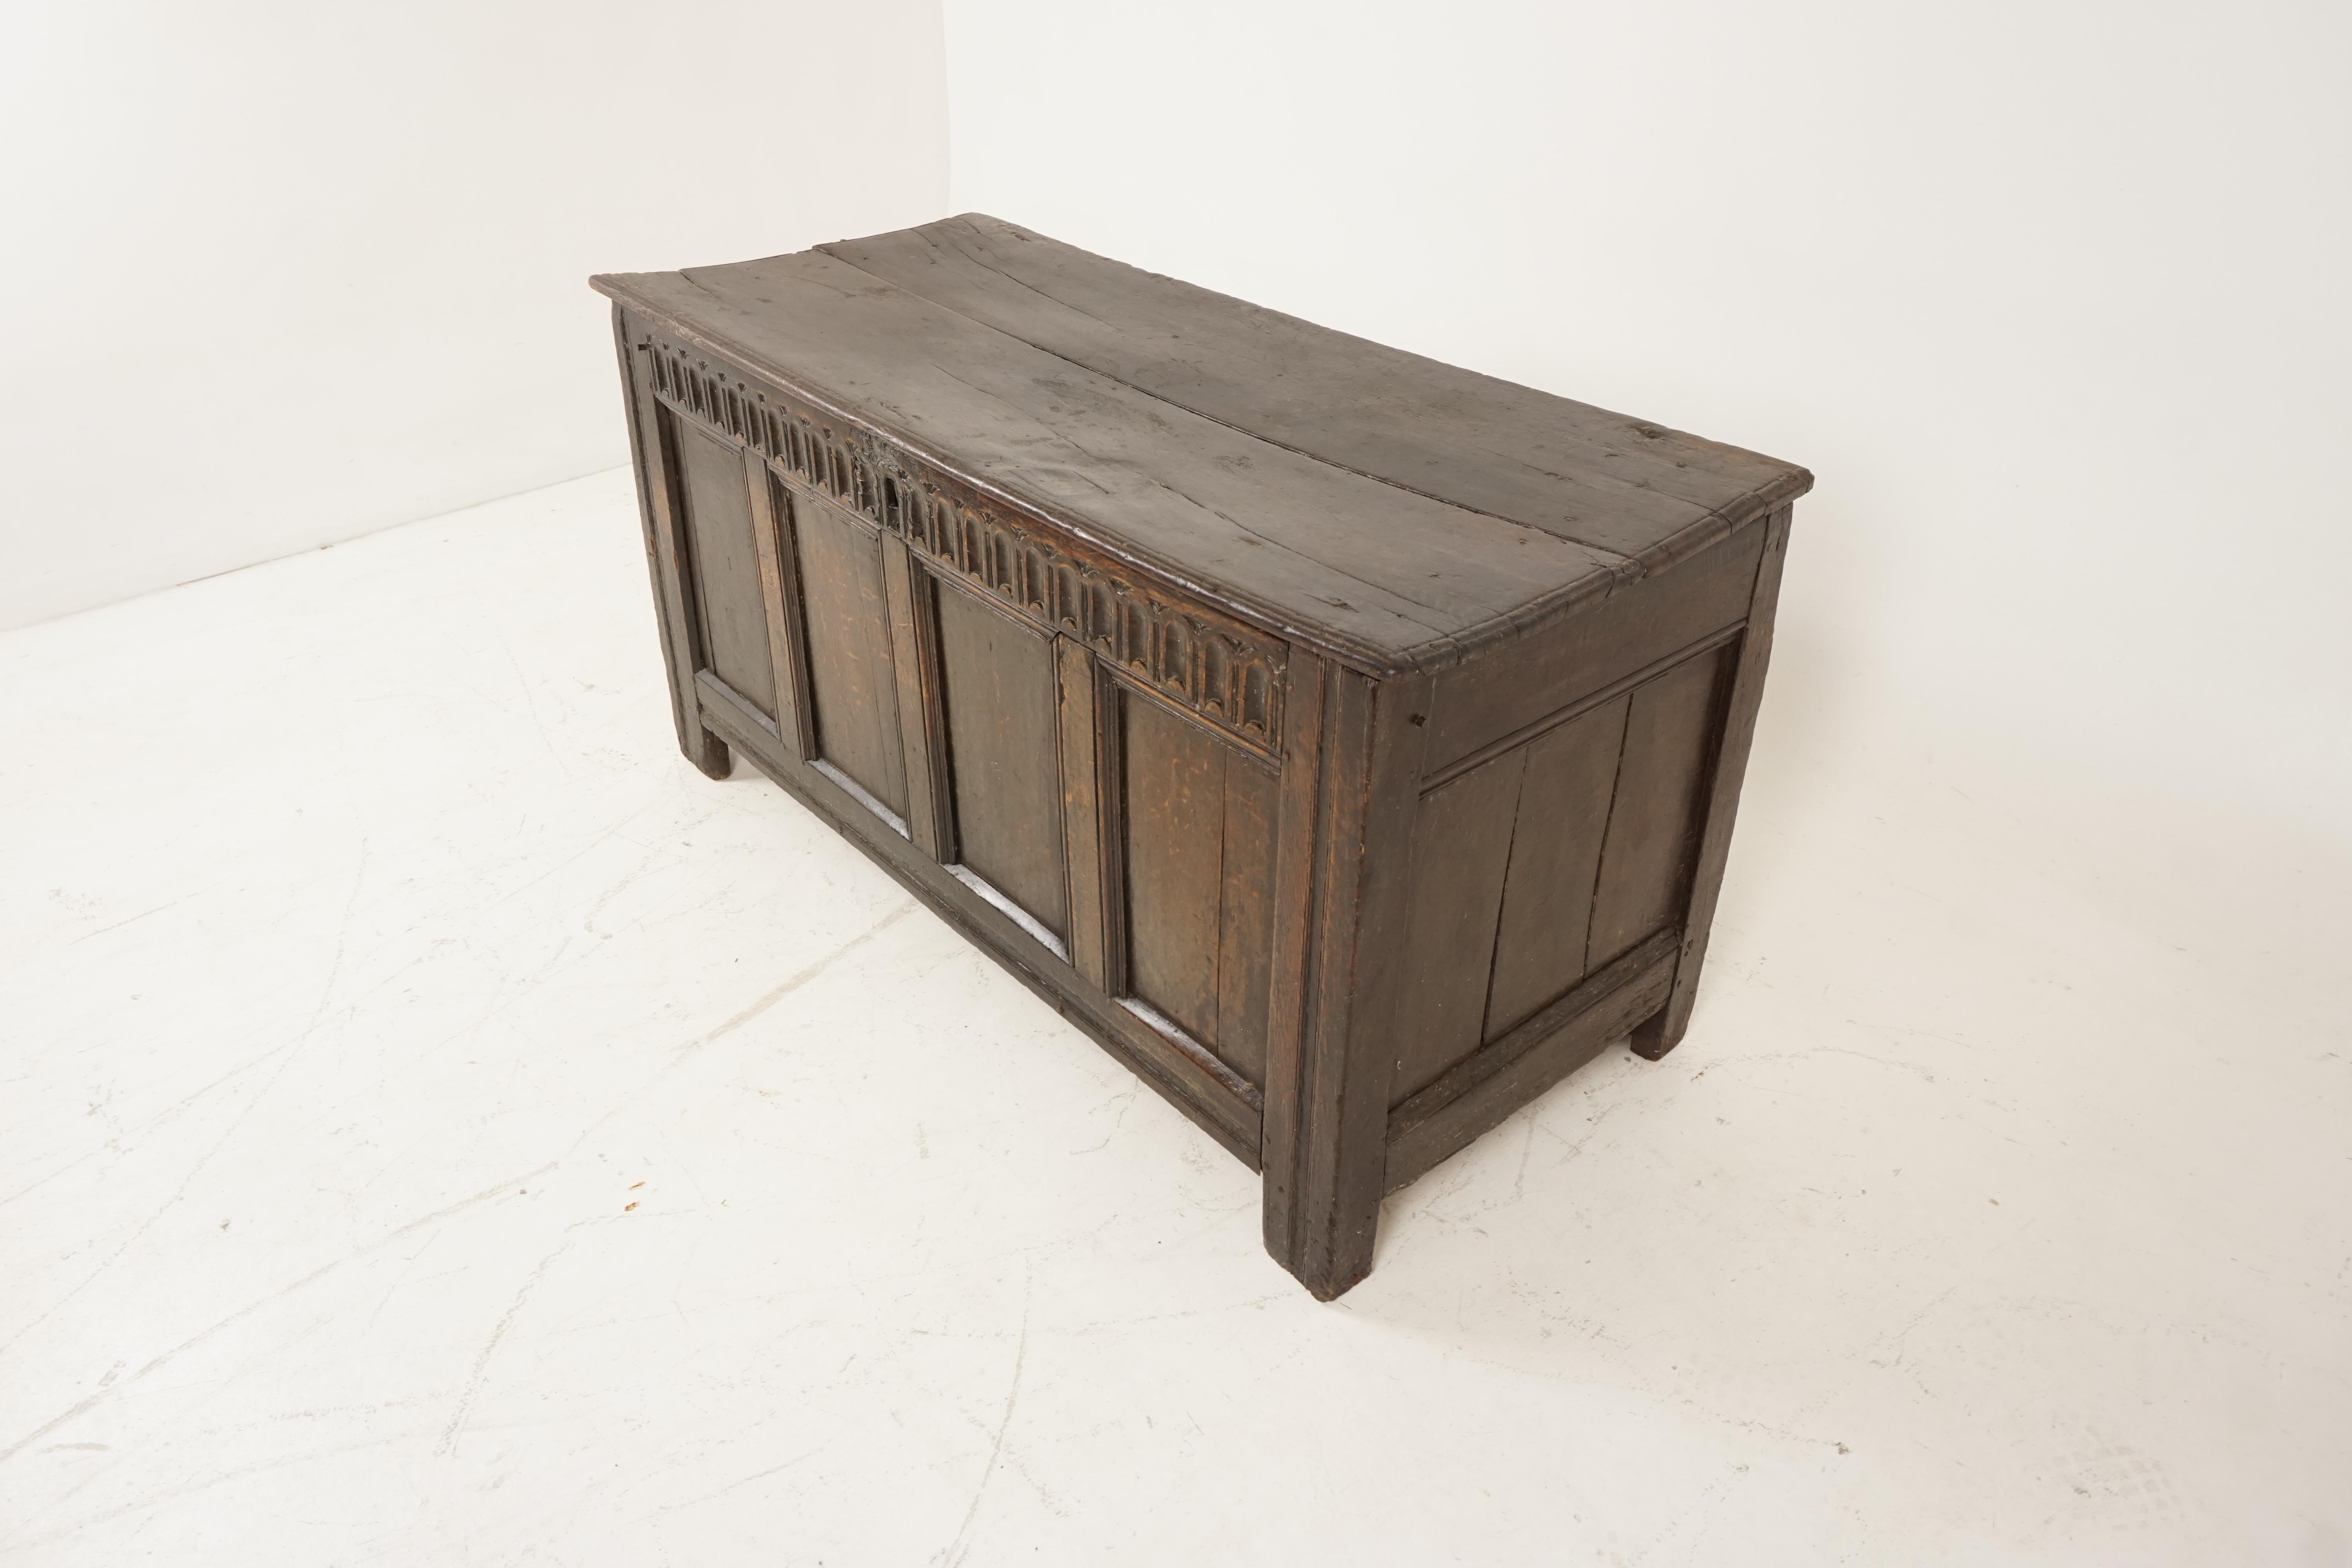 Antique carved oak plank coffer, 18th century, blanket box, Trunk, Scotland 1770, H148

Scotland 1770
Solid oak
Original finish
Rectangular hinged washed top
Above a four plain paneled front and sides
With carved decoration to the top
All standing